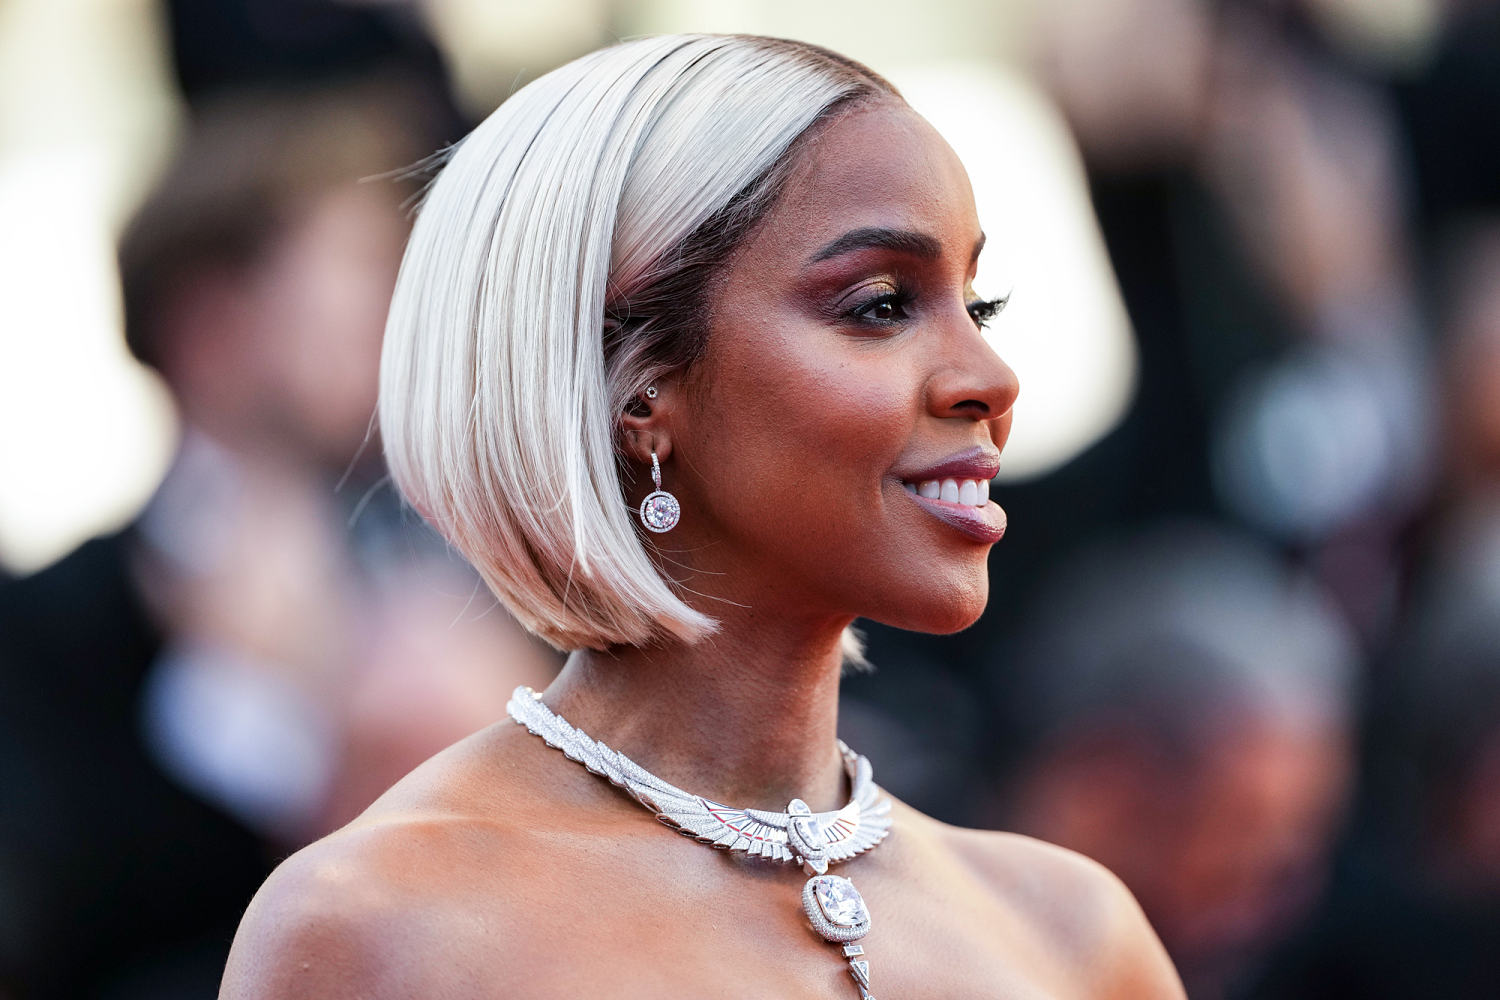 Kelly Rowland appears to clash with Cannes red carpet usher after being rushed up stairs